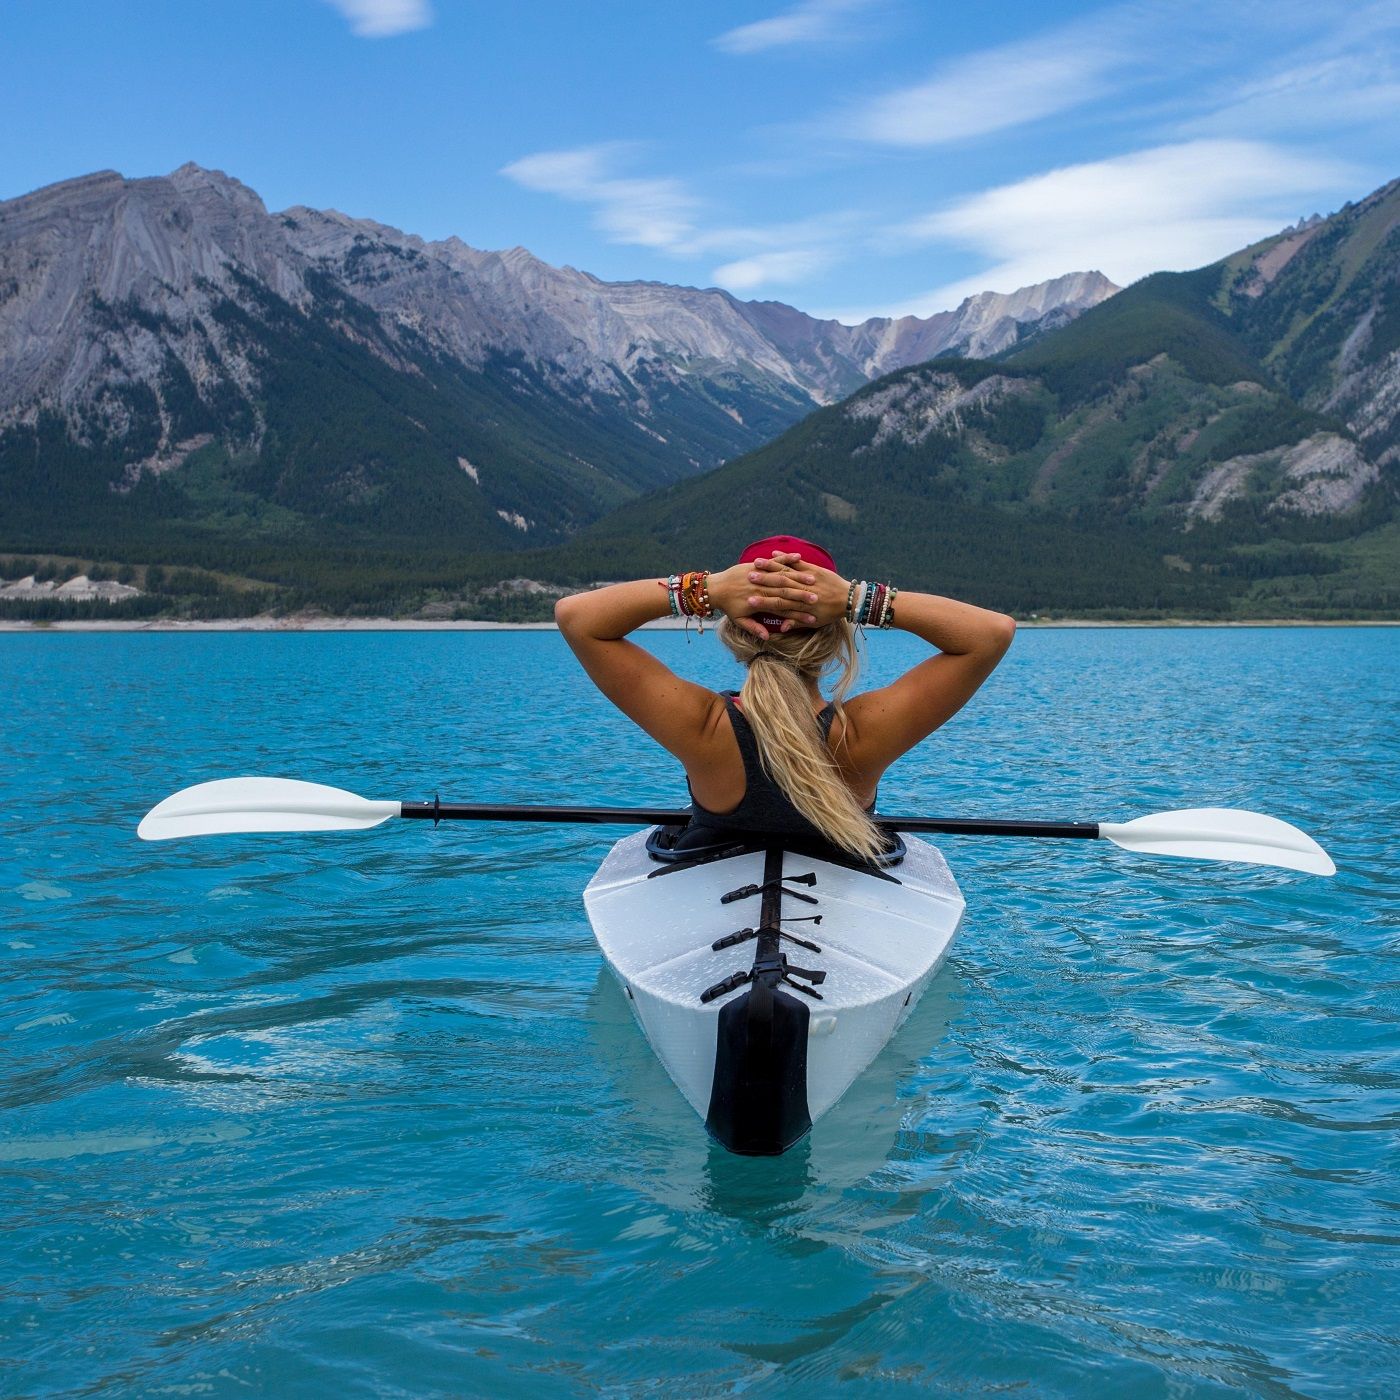 How To Choose A New Kayak?